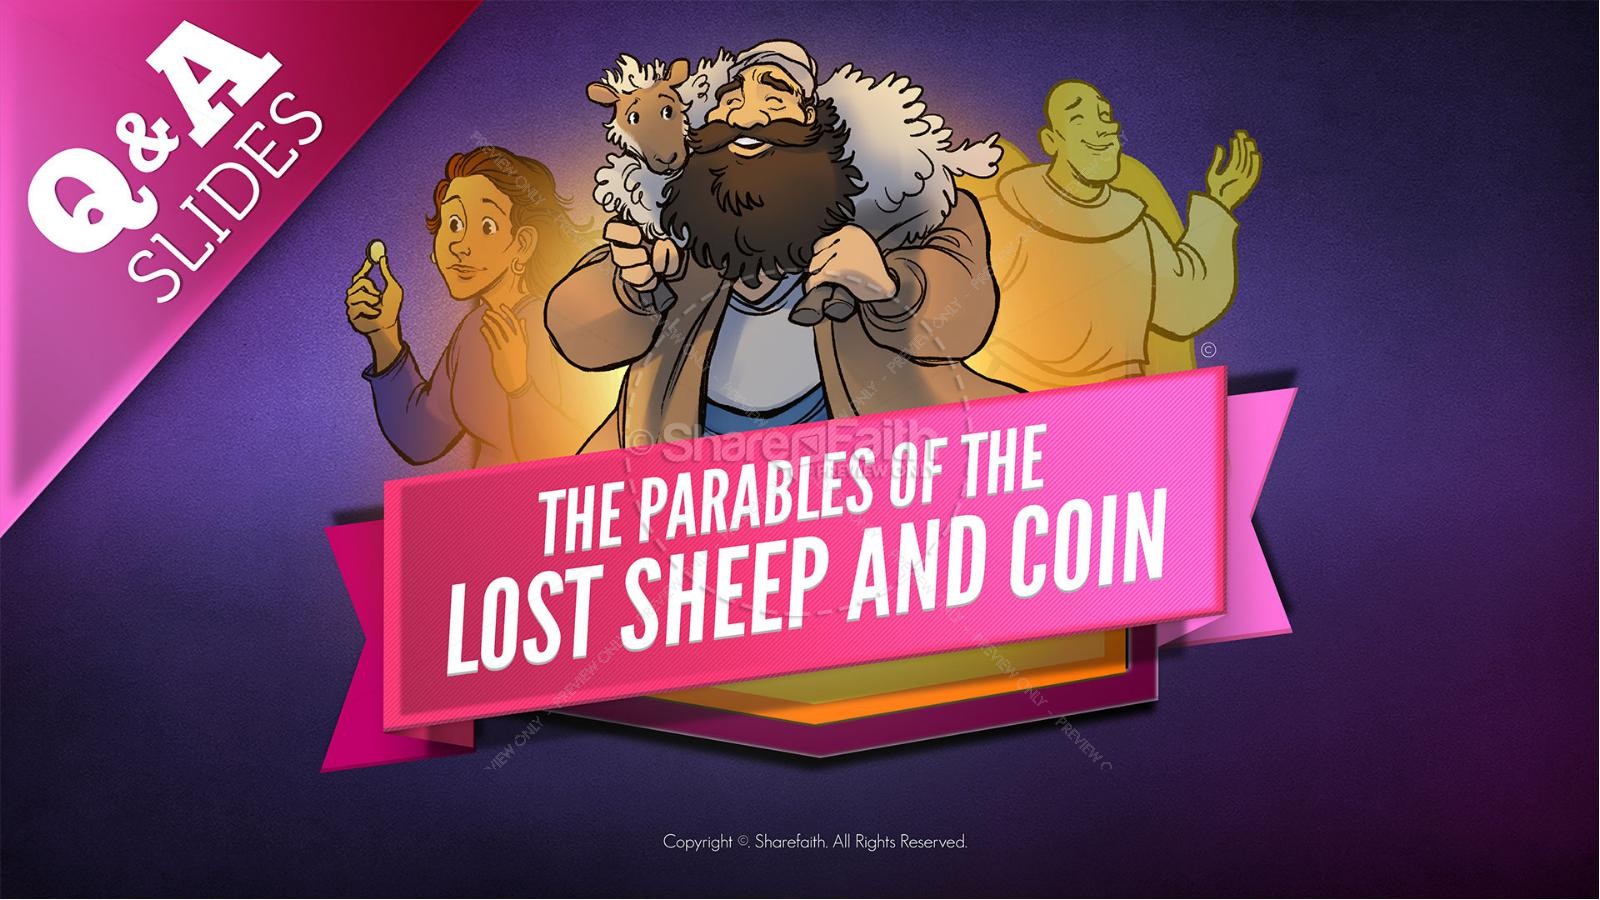 Luke 15 The Parables of the Lost Sheep and Coin Kids Bible Story